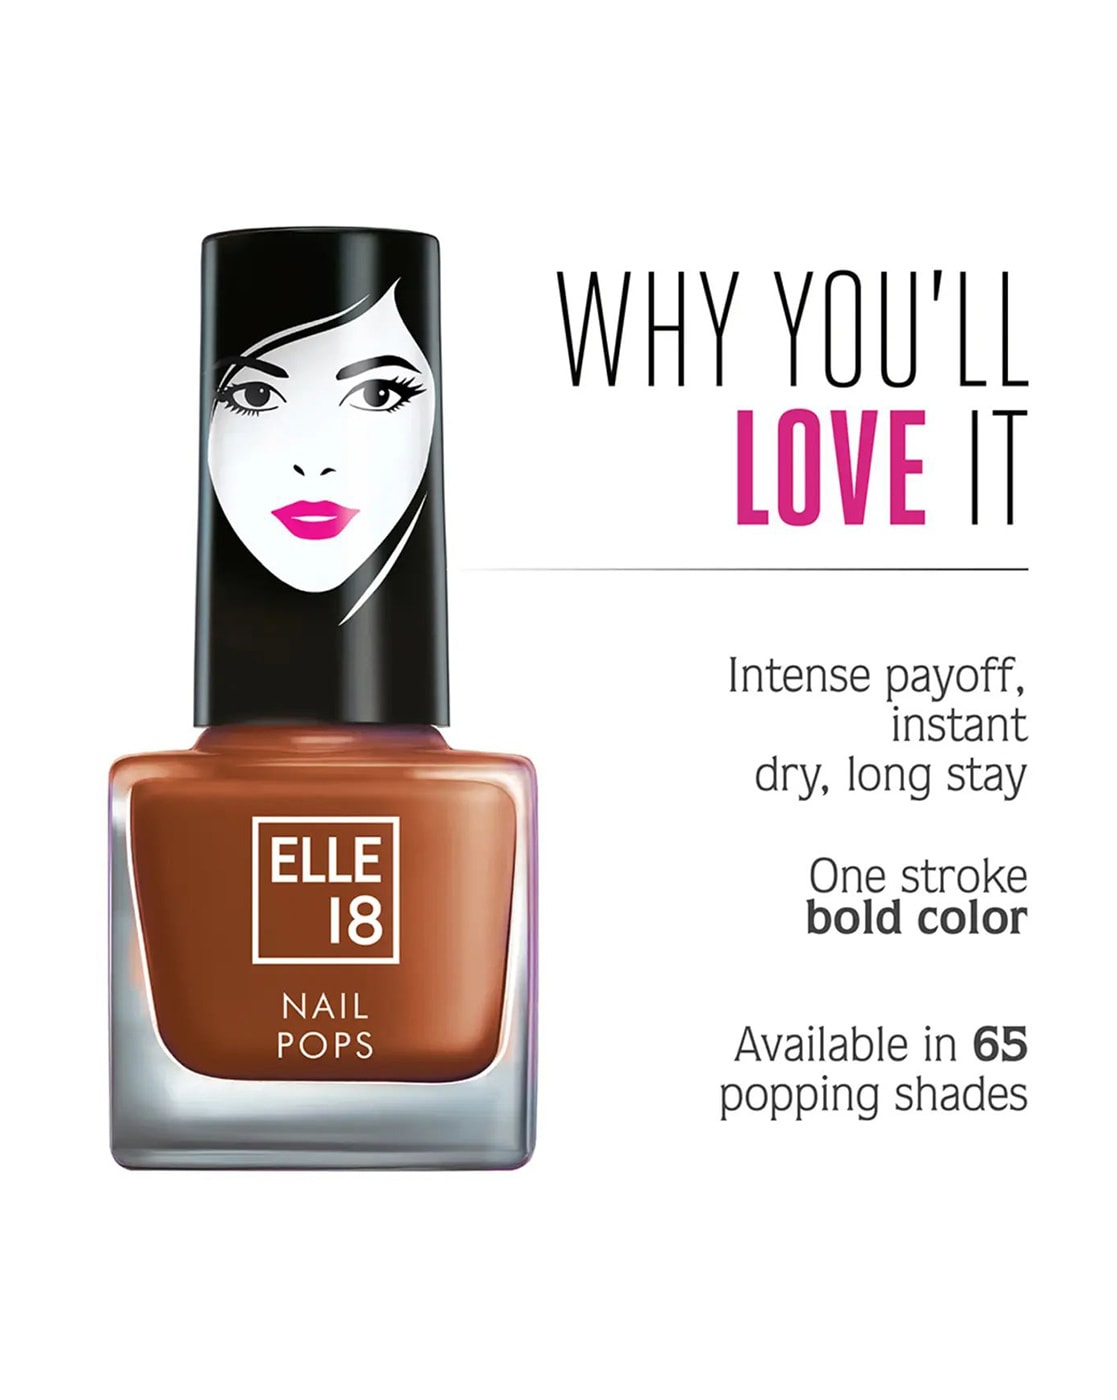 Buy Elle18 Nail Pops Nail Color 160 5 ml Online at Best Prices in India -  JioMart.